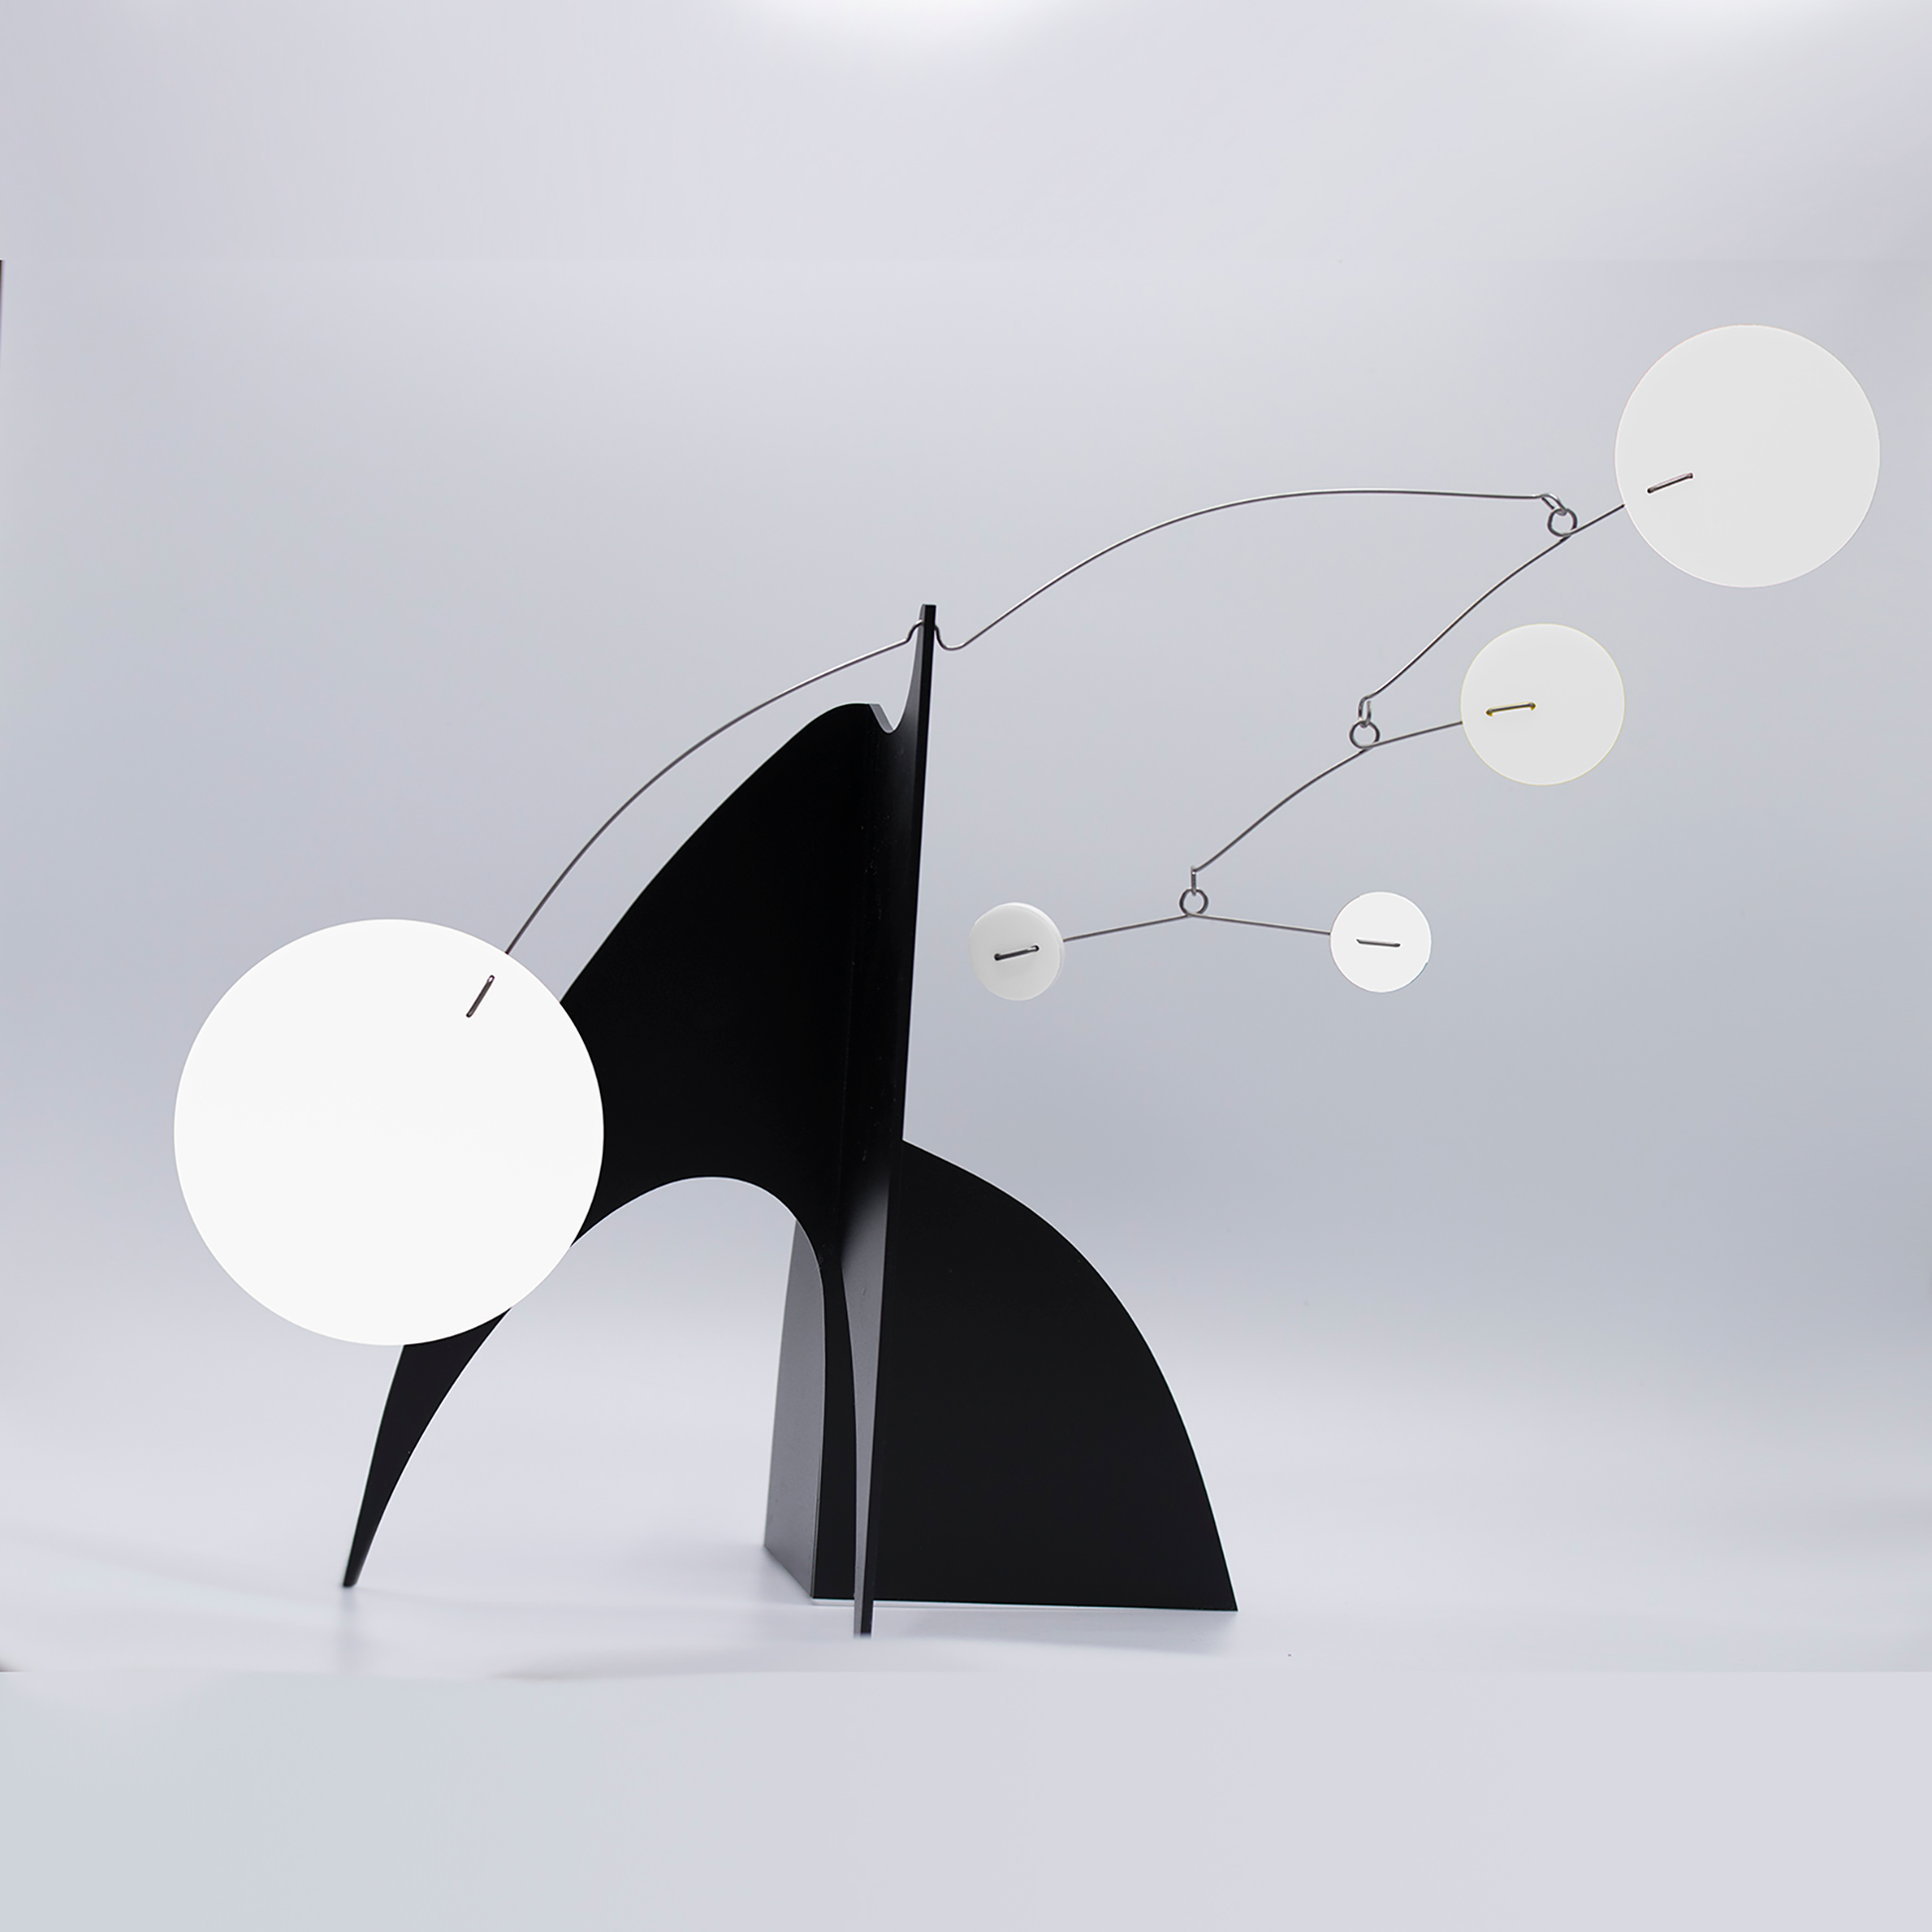 Beautiful Moderne Art Stabile in modernist minimalist colors of black and white - mid century modern inspired abstract modern art - tabletop kinetic art sculpture mobiles hand made with glossy plexiglass acrylic in Los Angeles by Debra Ann of AtomicMobiles.com